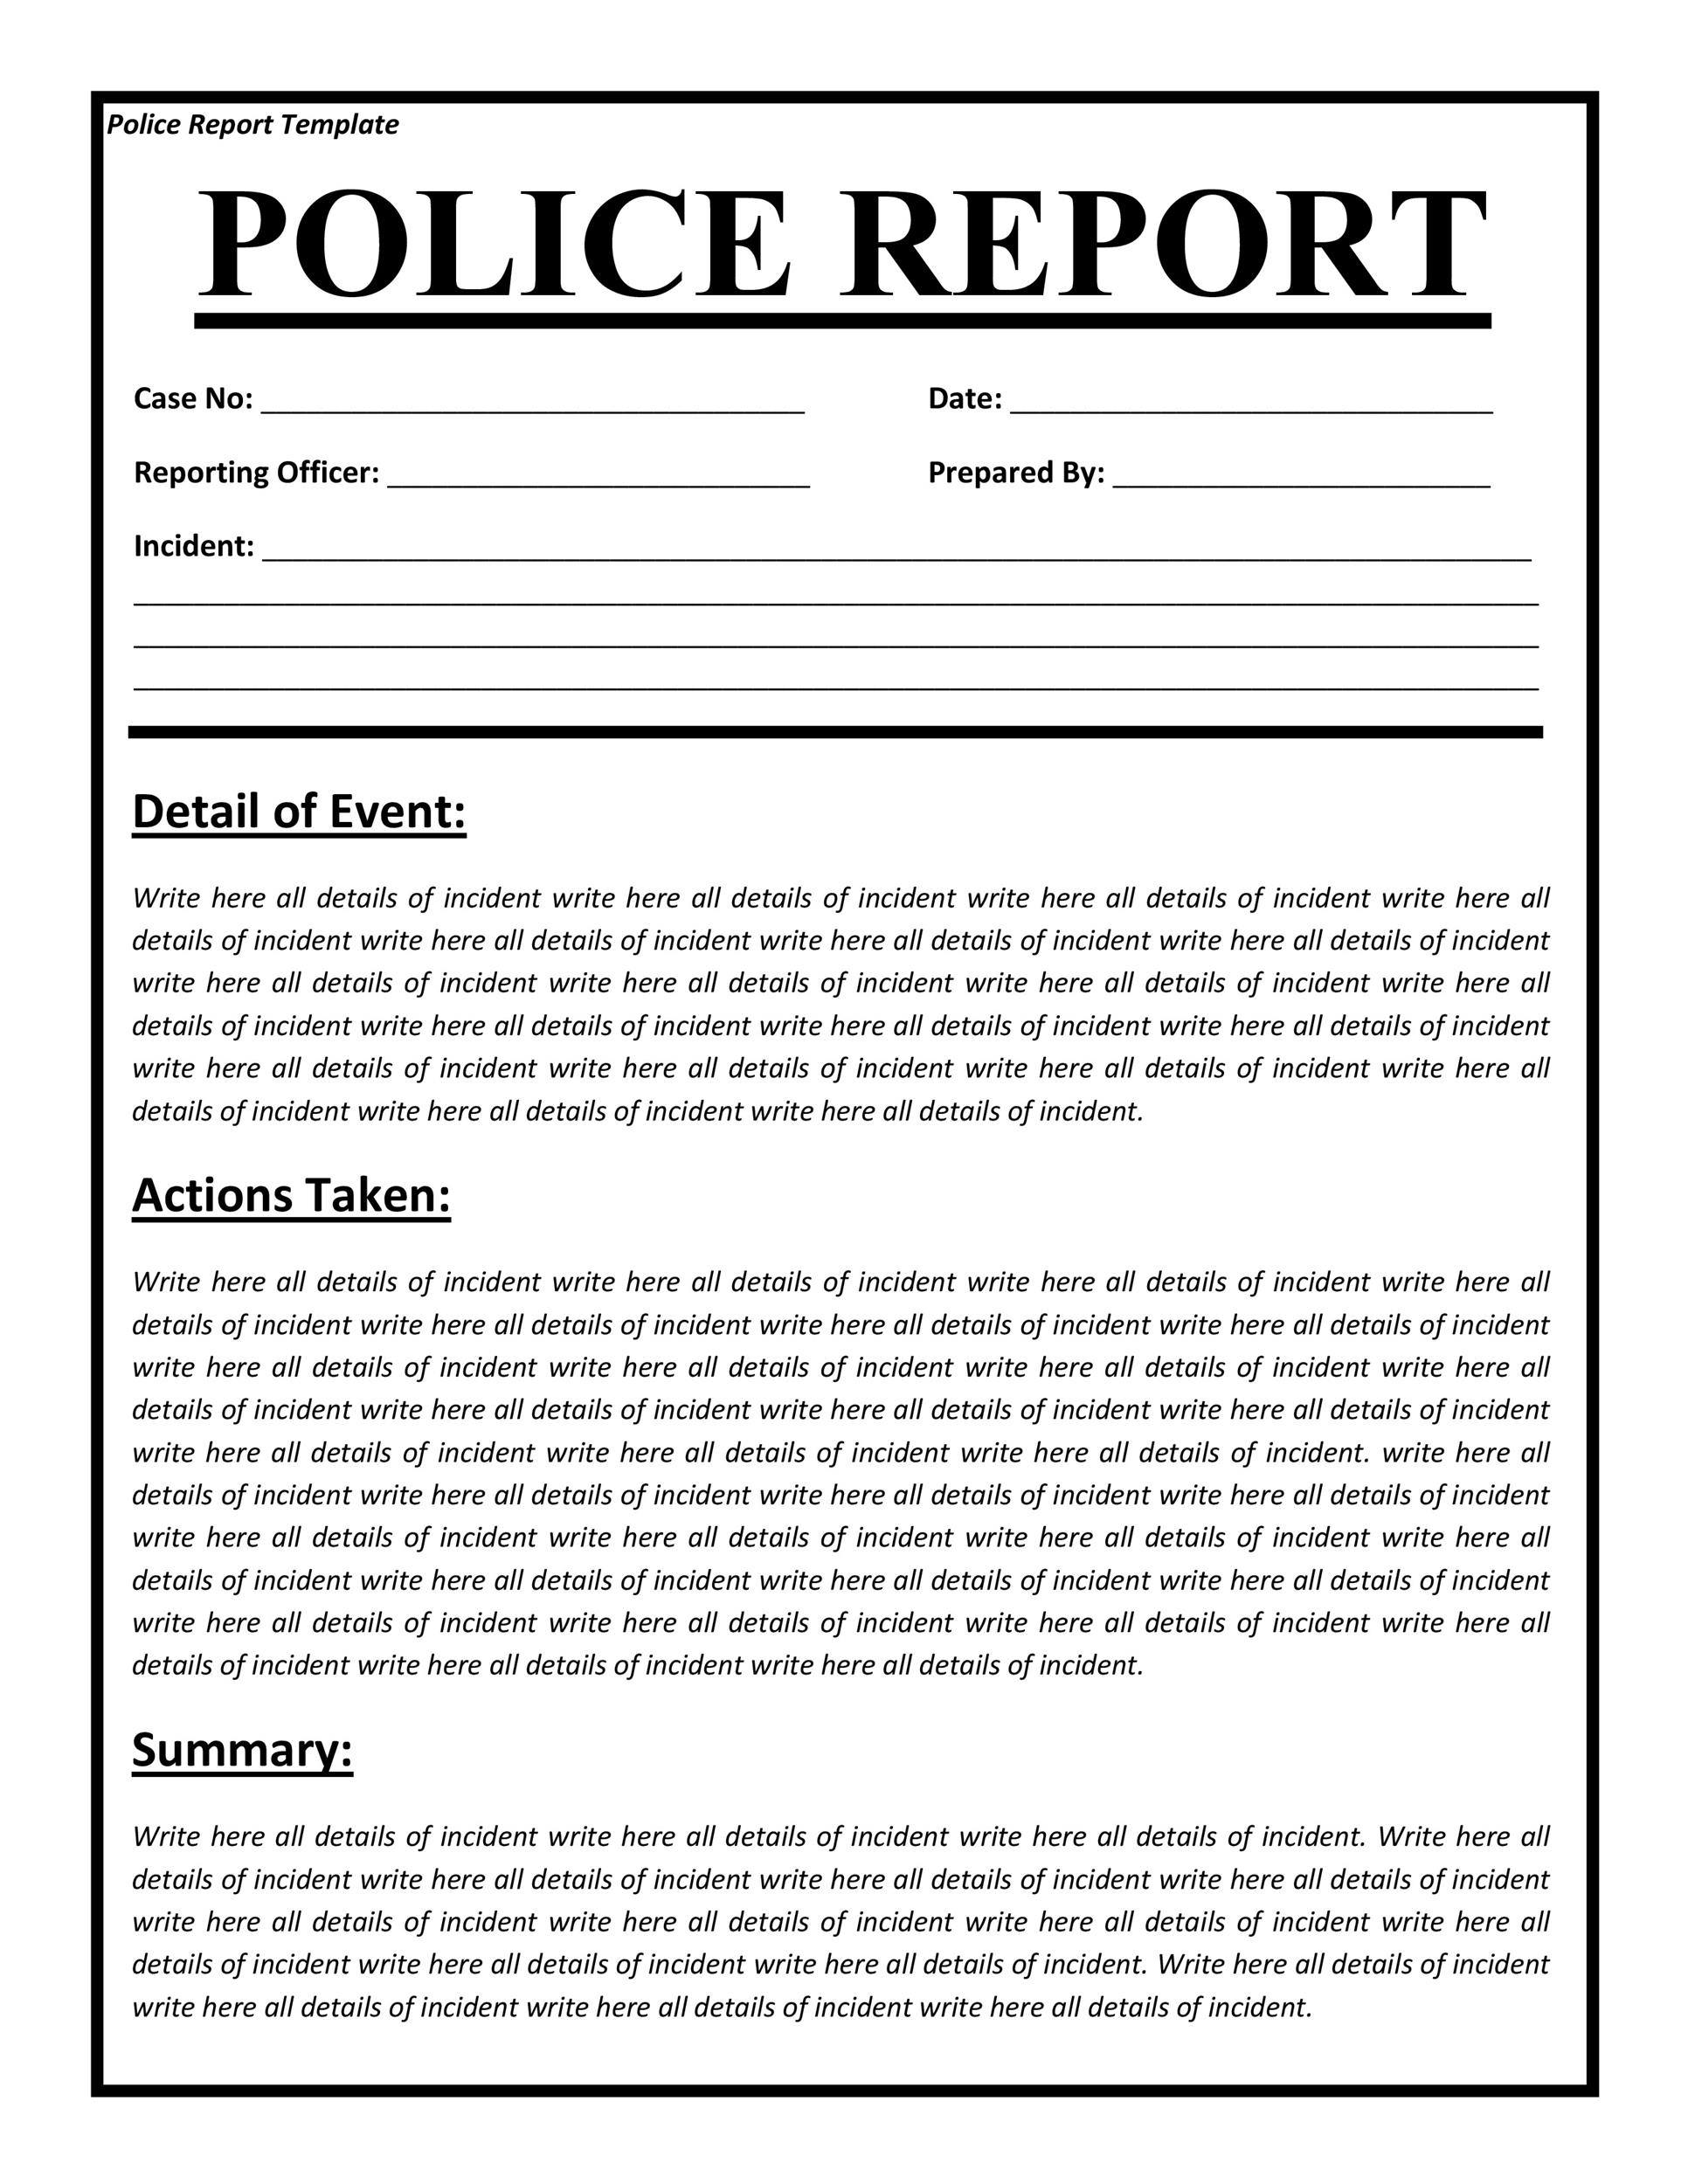 20+ Police Report Template & Examples [Fake / Real] ᐅ TemplateLab